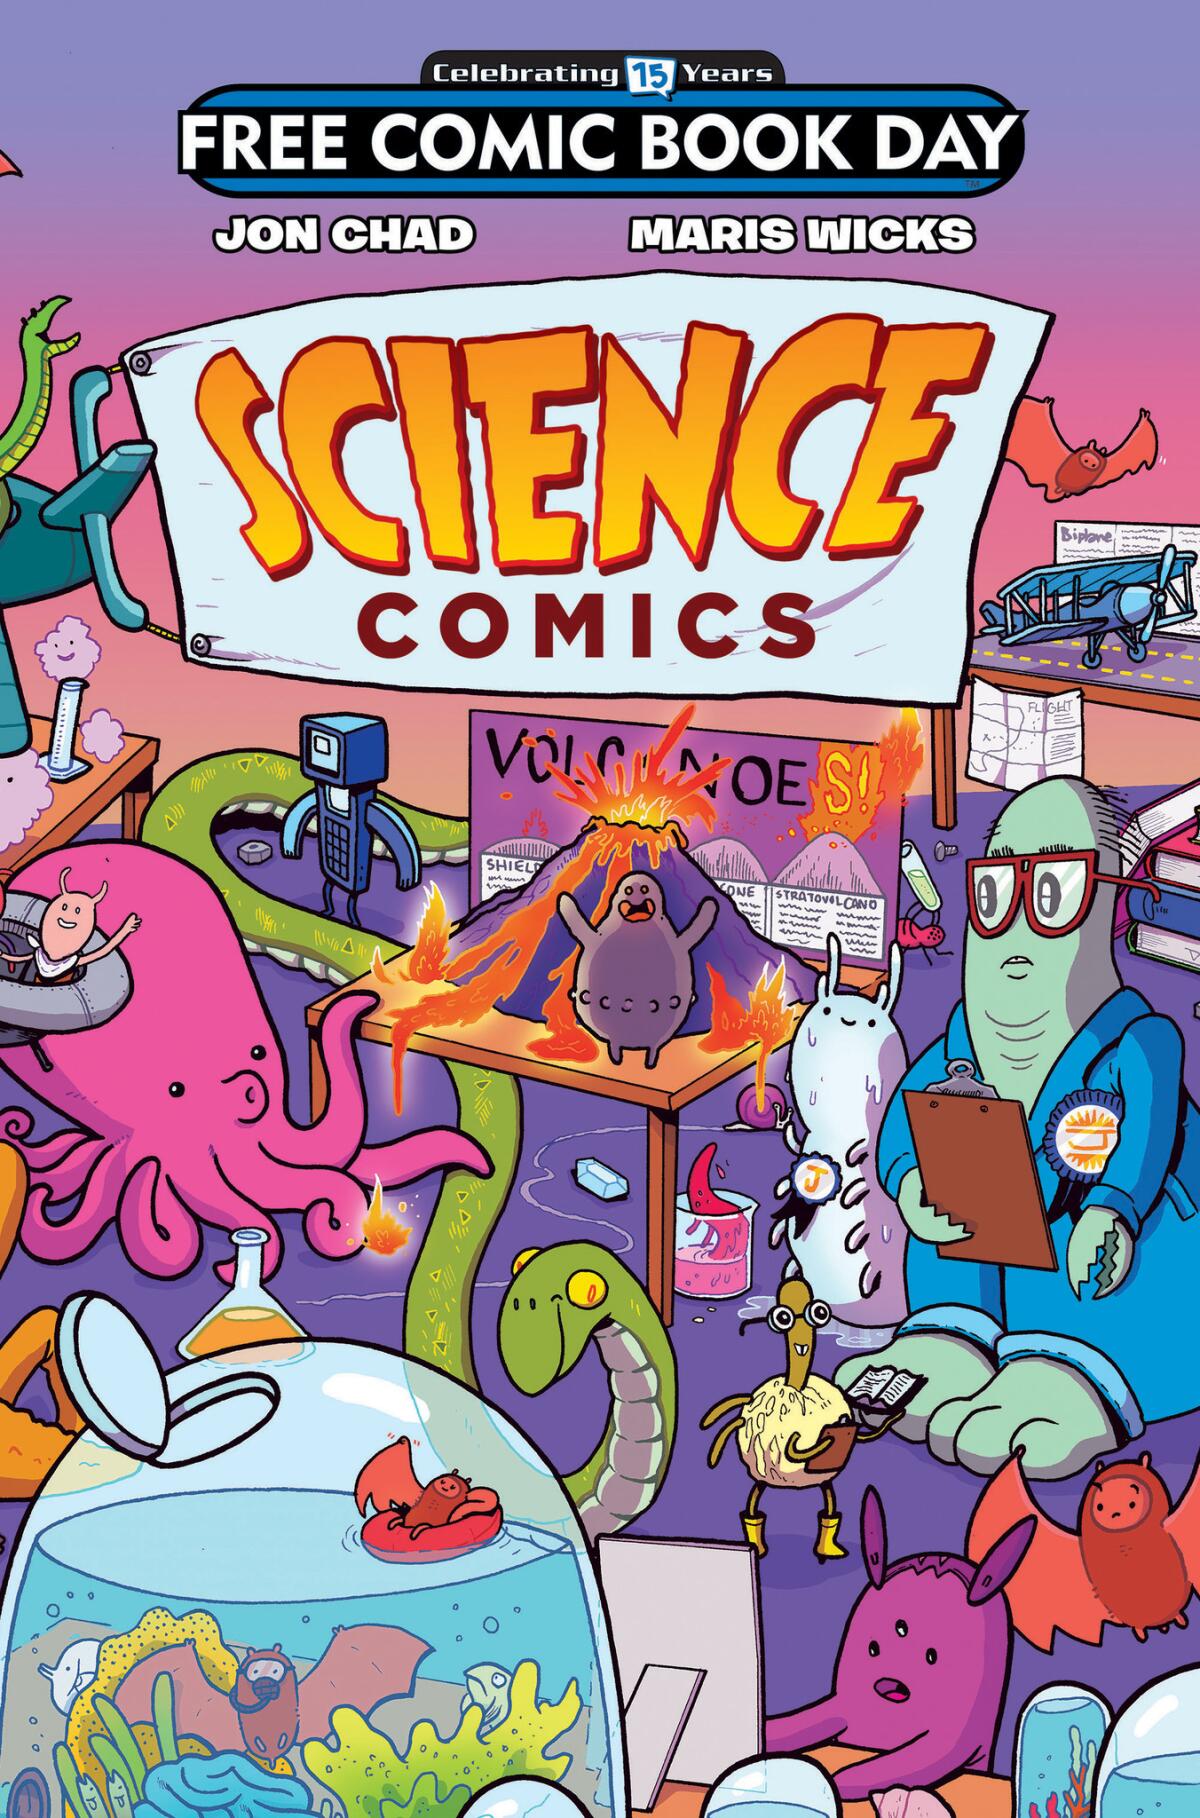 "Science Comics" FCBD edition by Maris Wicks and Jon Chad. (First Second)